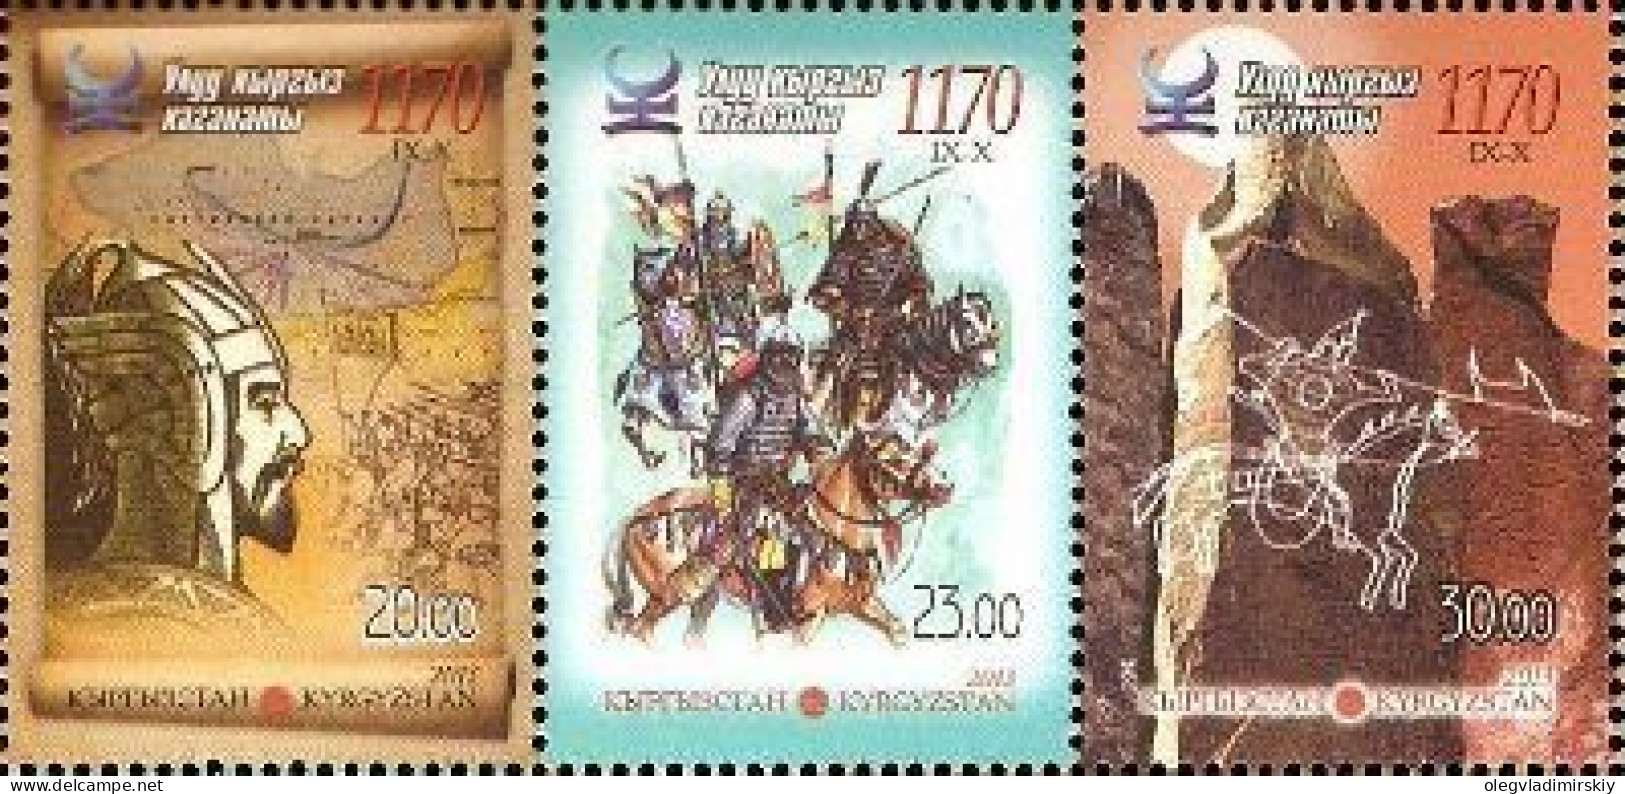 Kyrgyzstan 2013 Great Kyrgyz Kaganate 1170 Years Set Of 3 Stamps In Strip MNH - Archeologie